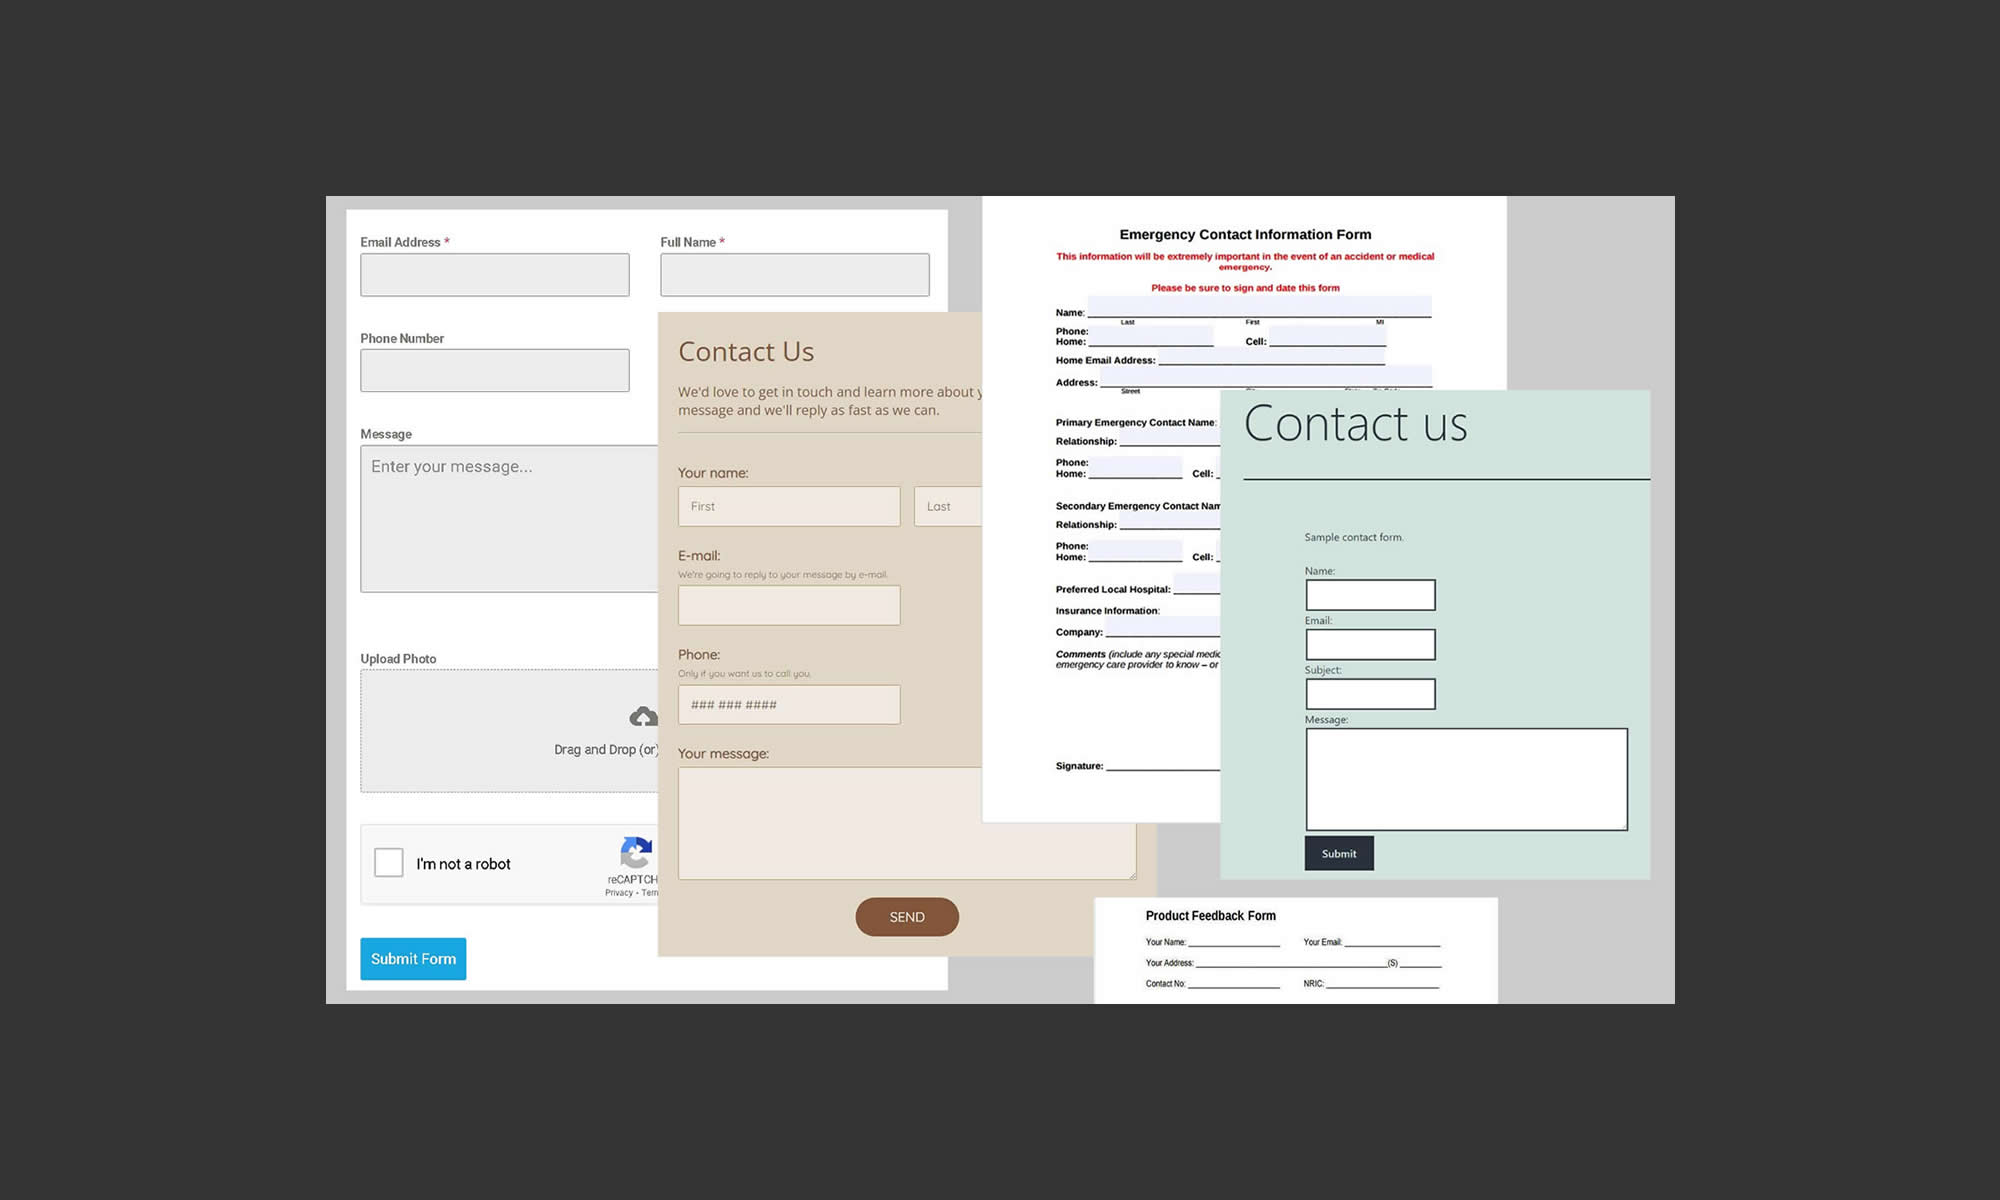 No more contact form spam. End contact form spam now.